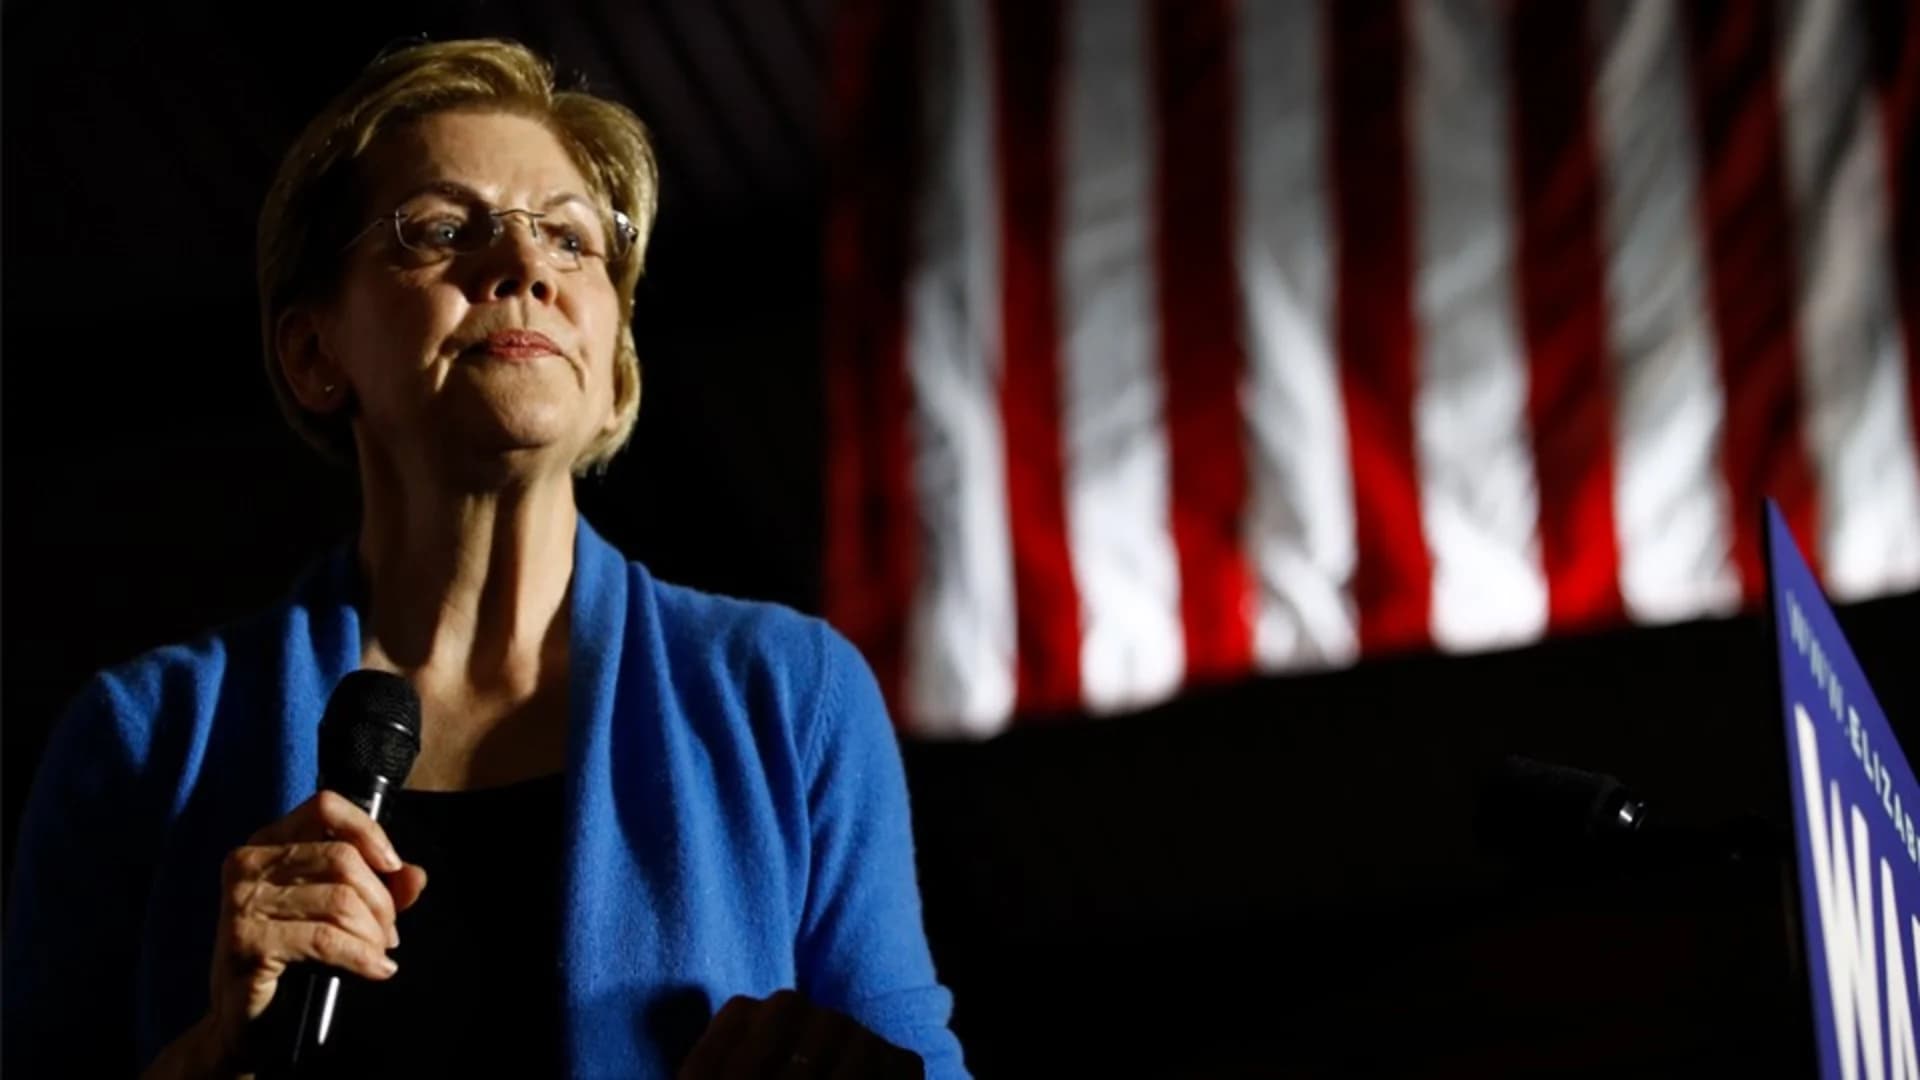 Warren huddles with advisers, reassesses presidential race